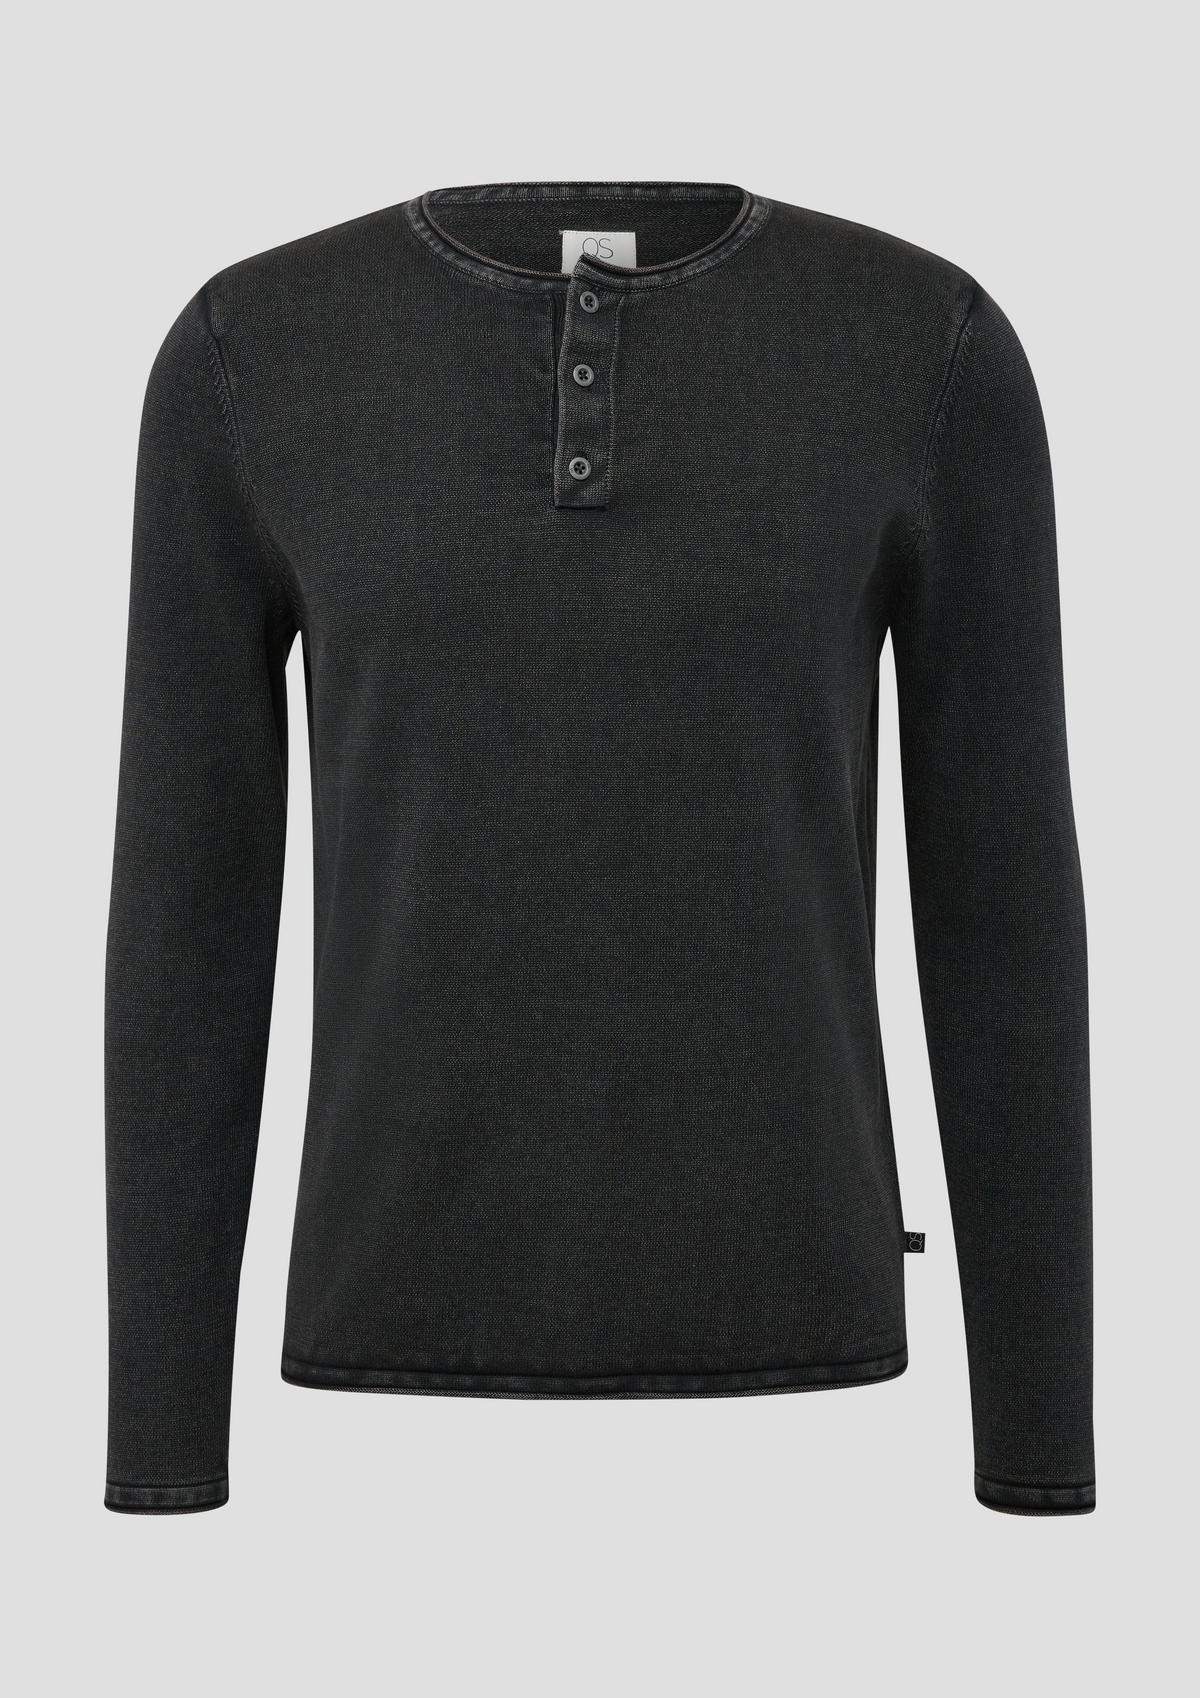 s.Oliver Fine-knit long sleeve top